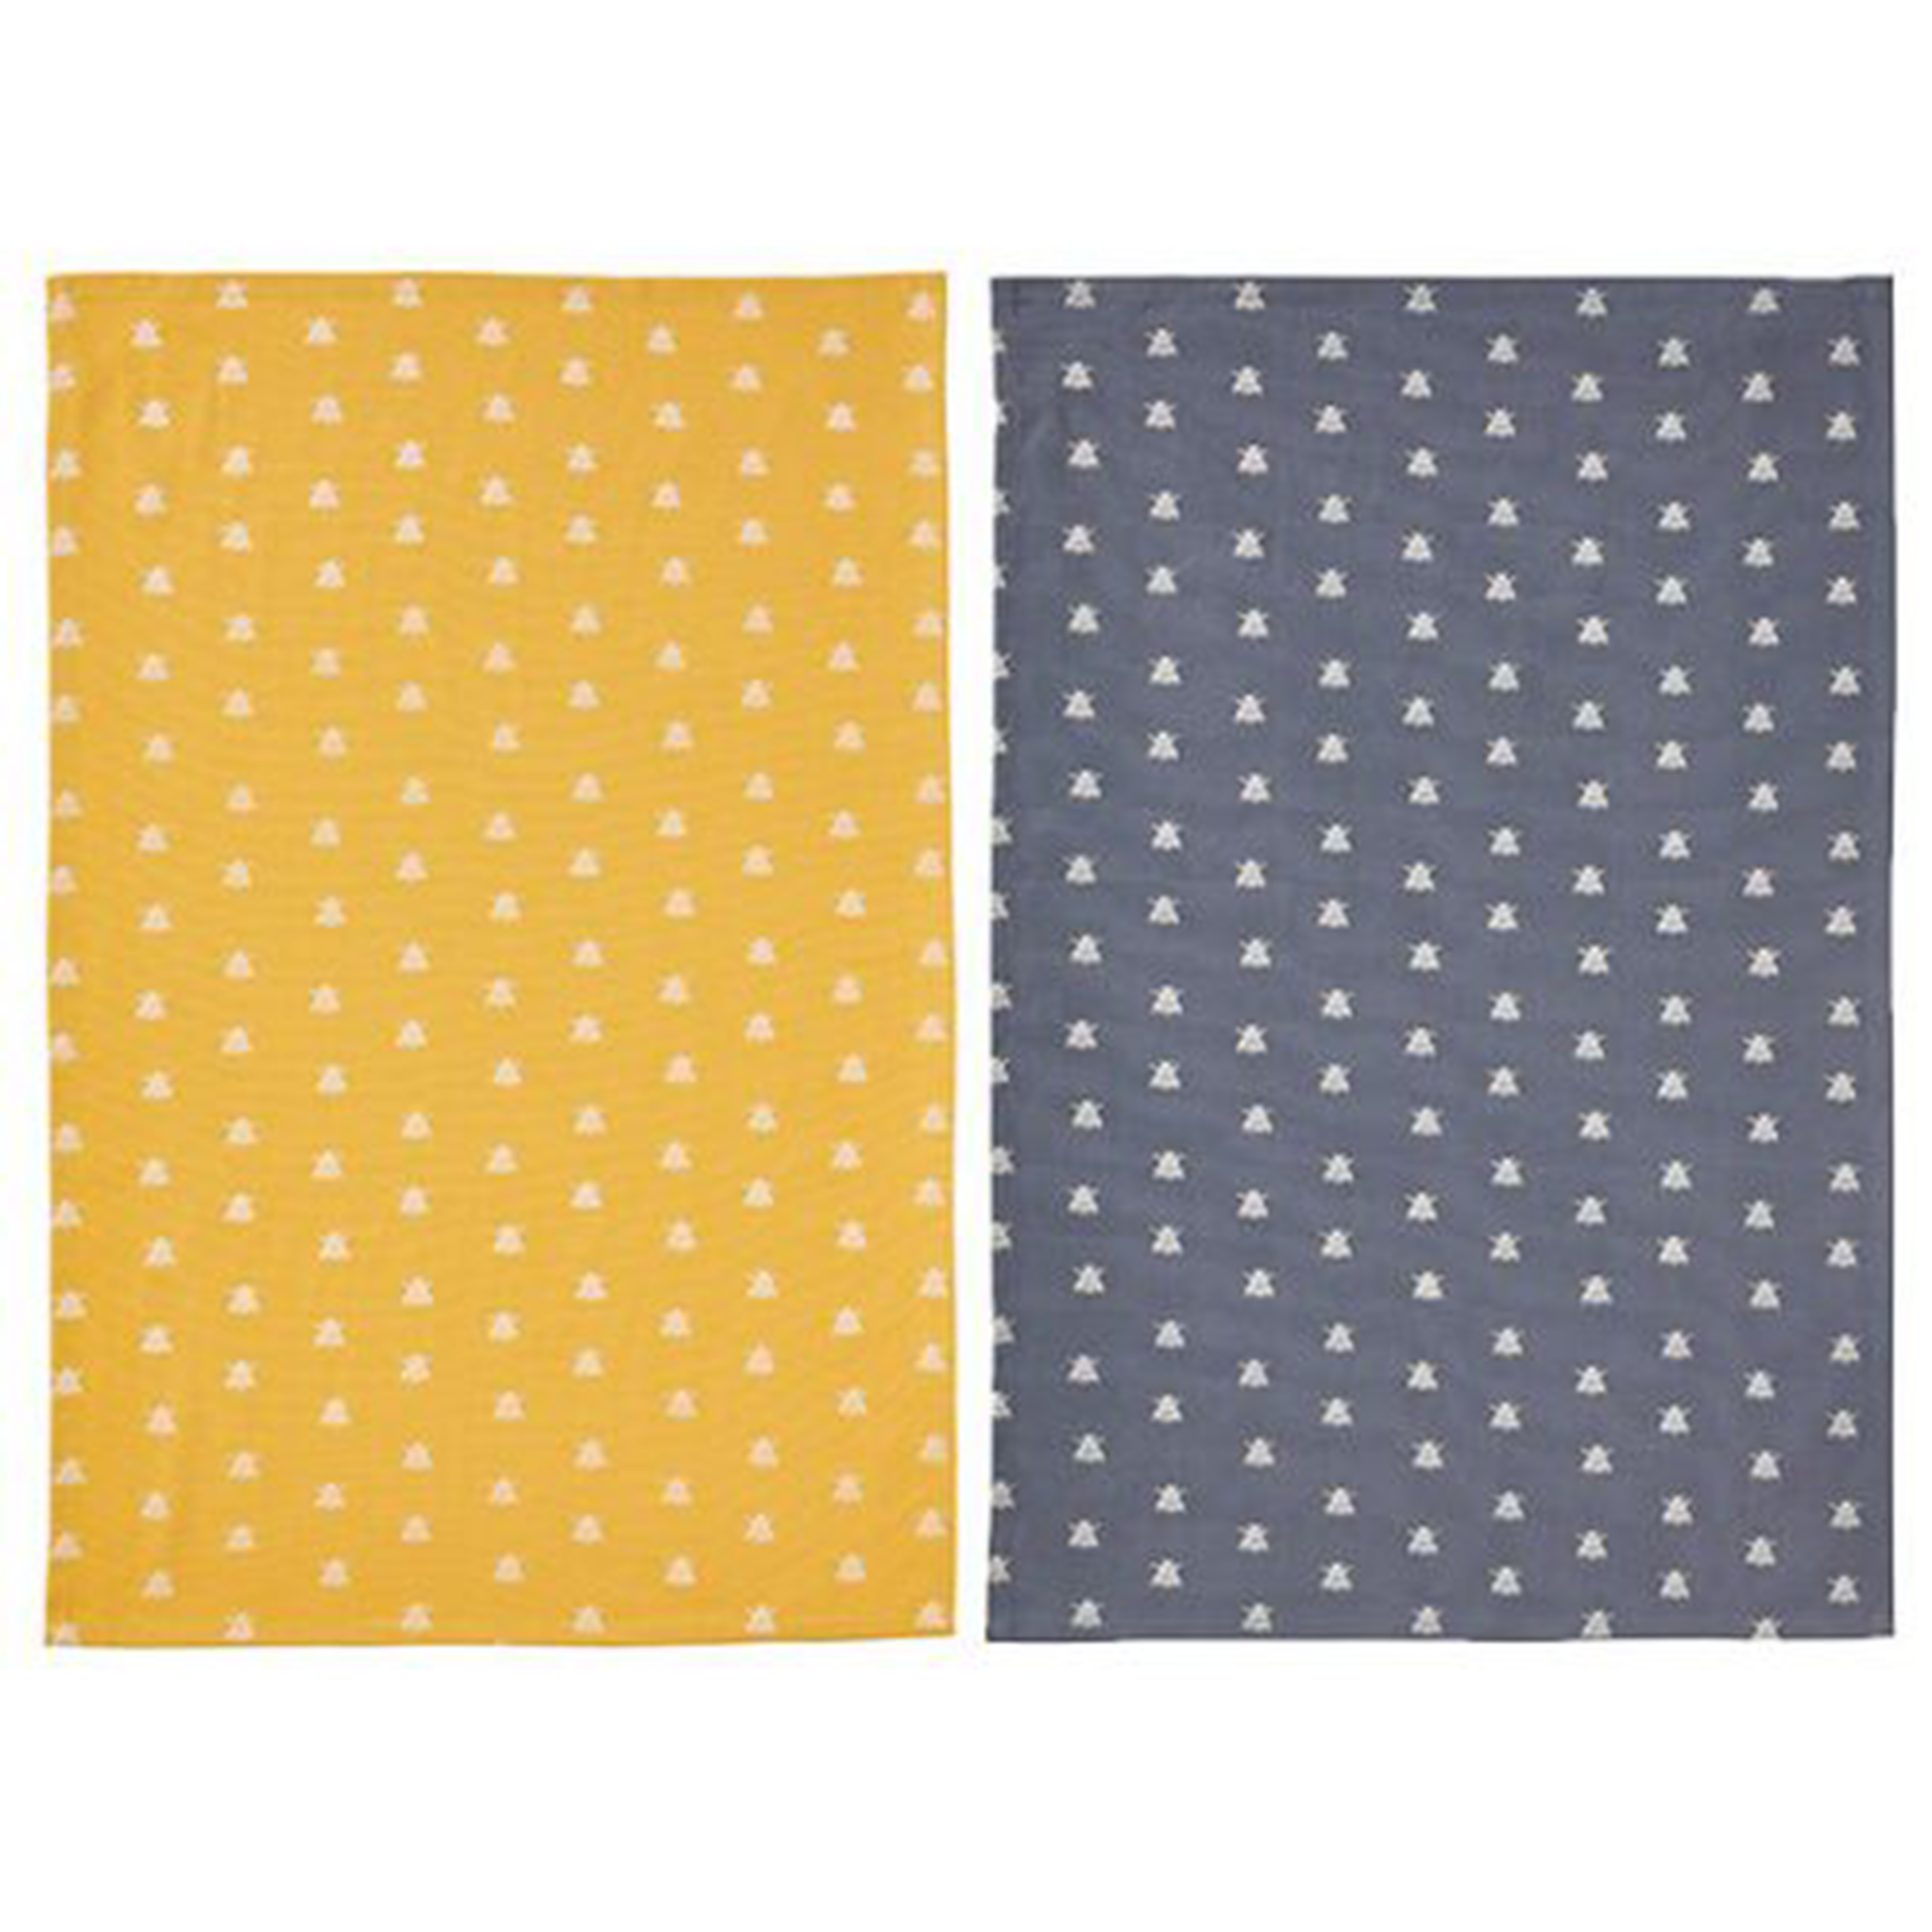 one yellow and one blue tea towel each featuring a white bee pattern